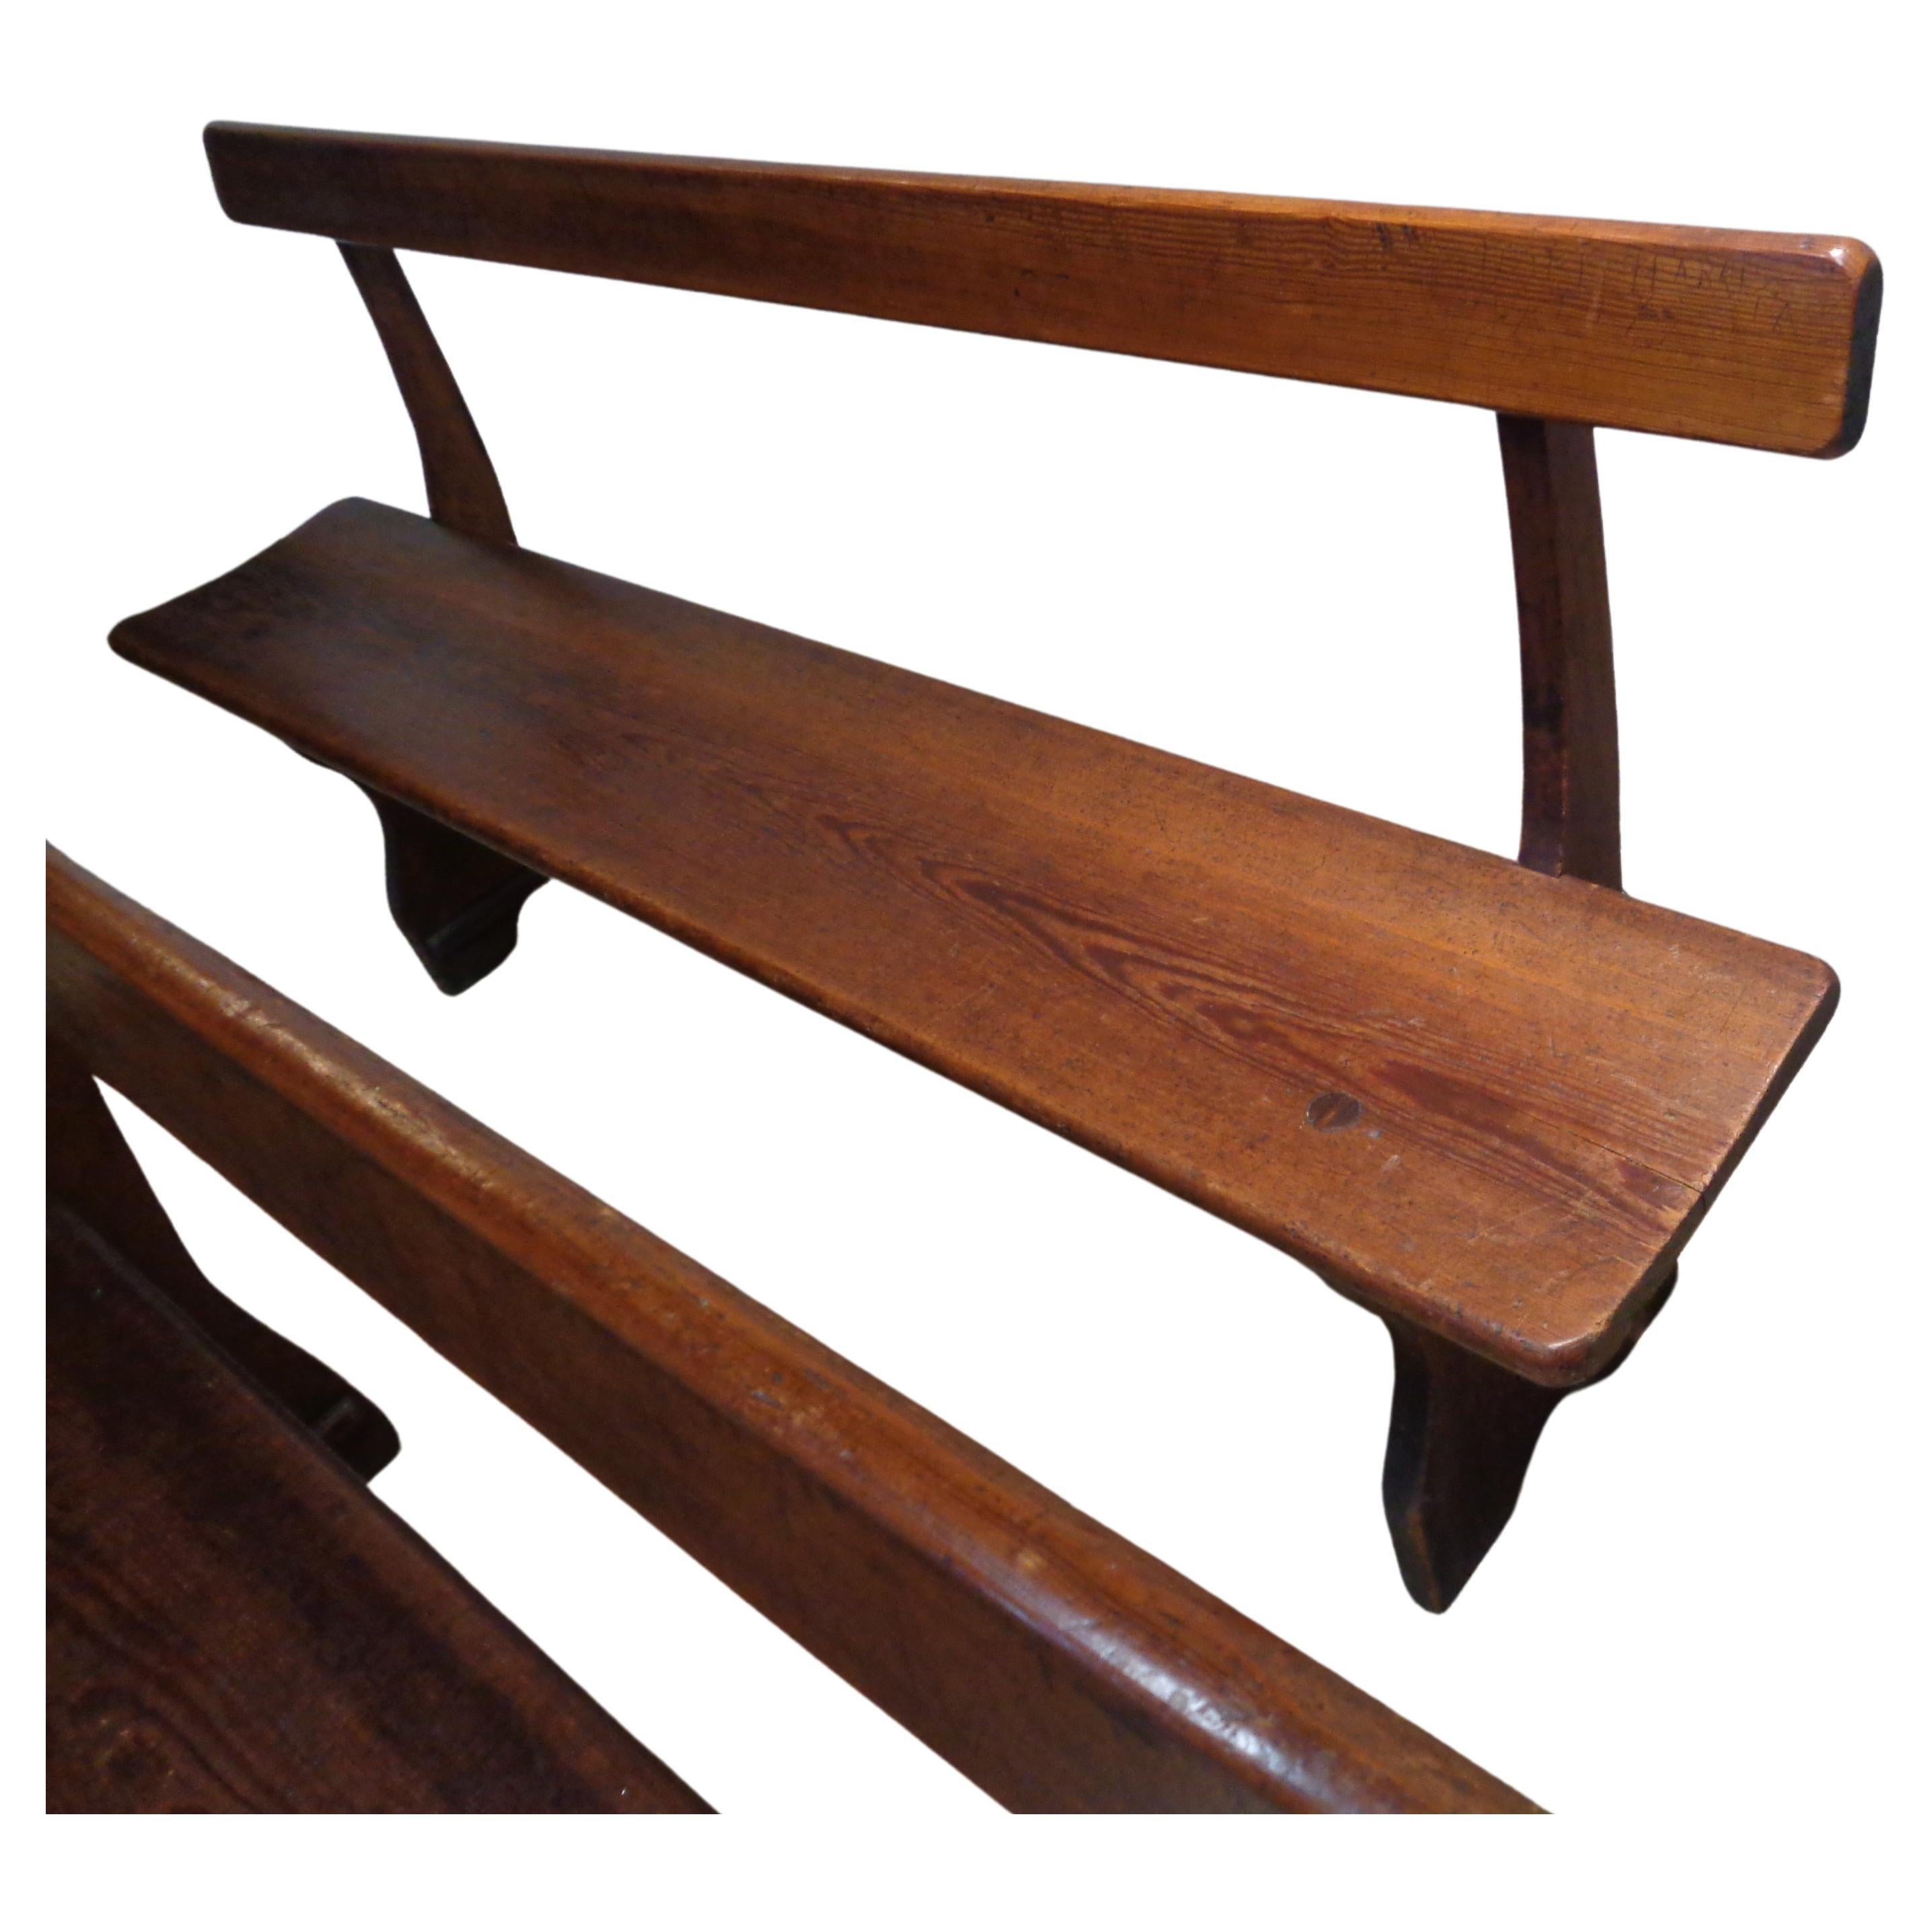  Exceptional Antique American Country Benches For Sale 2